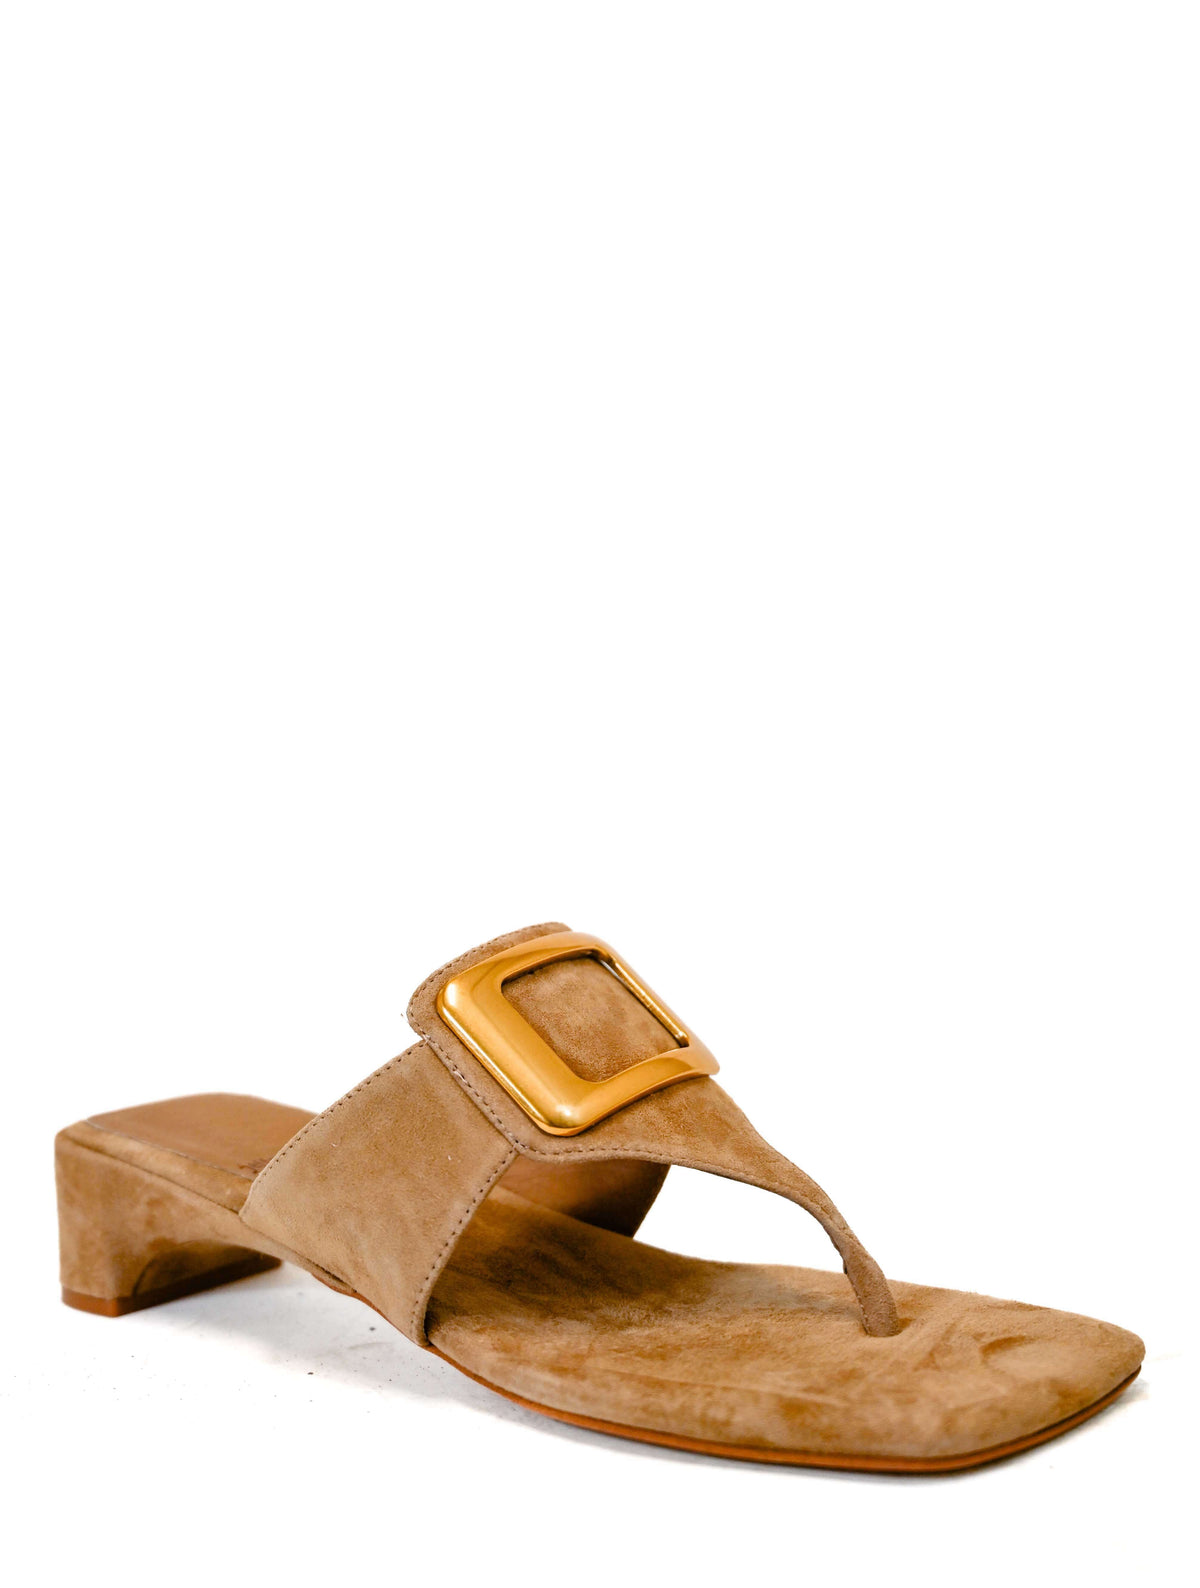 Jeffrey Campbell Kirstie Sandal in Natural Suede/Gold